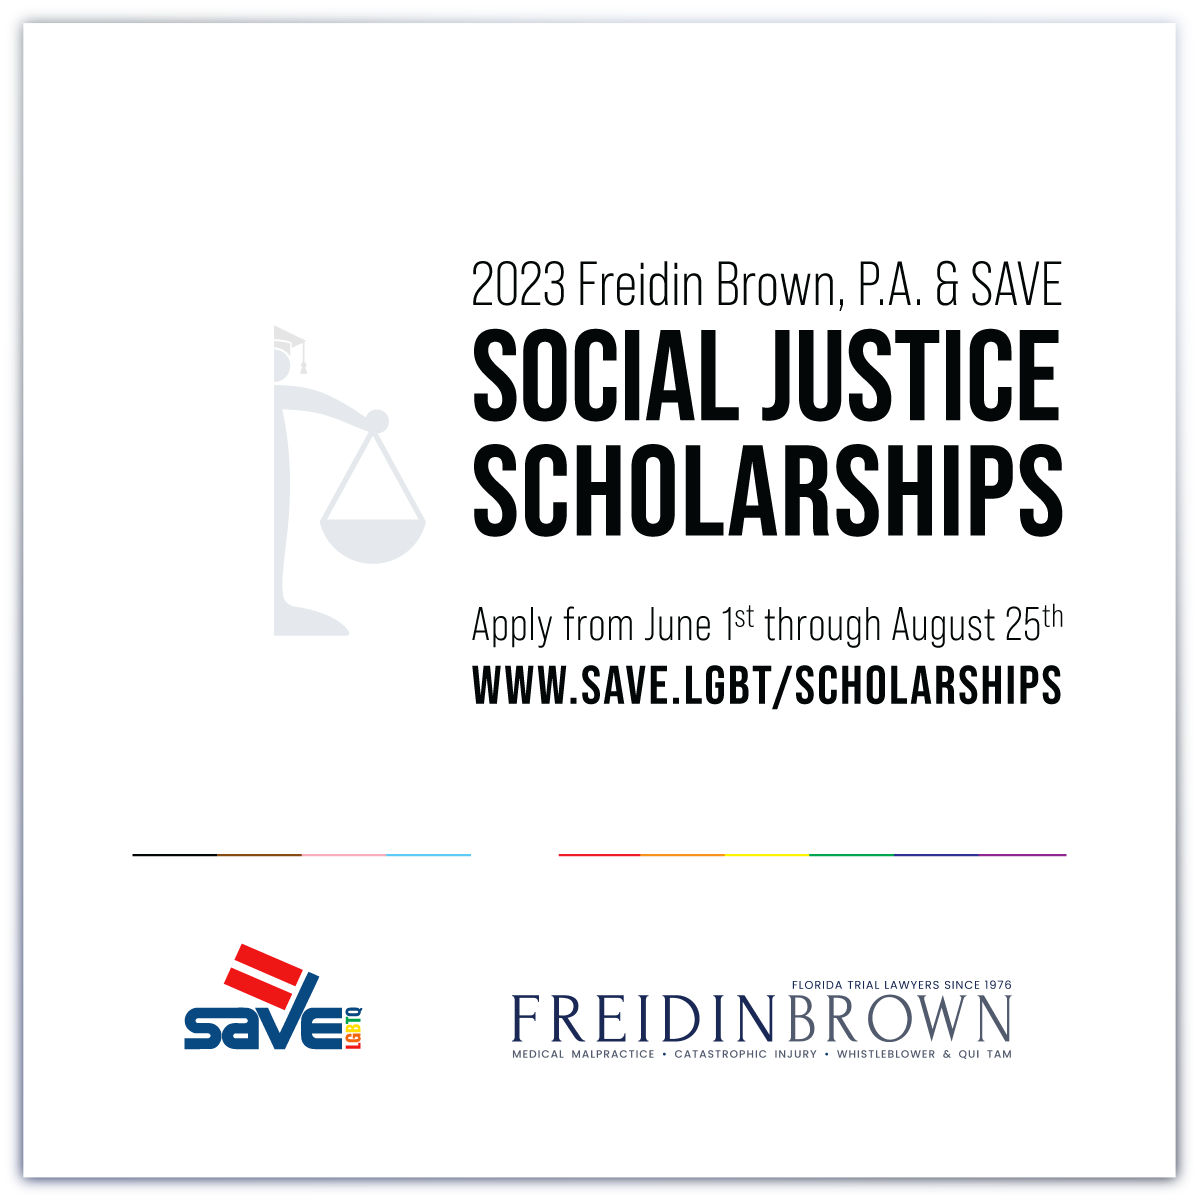 Freidin Brown, P.A. & SAVE Social Justice Scholarships